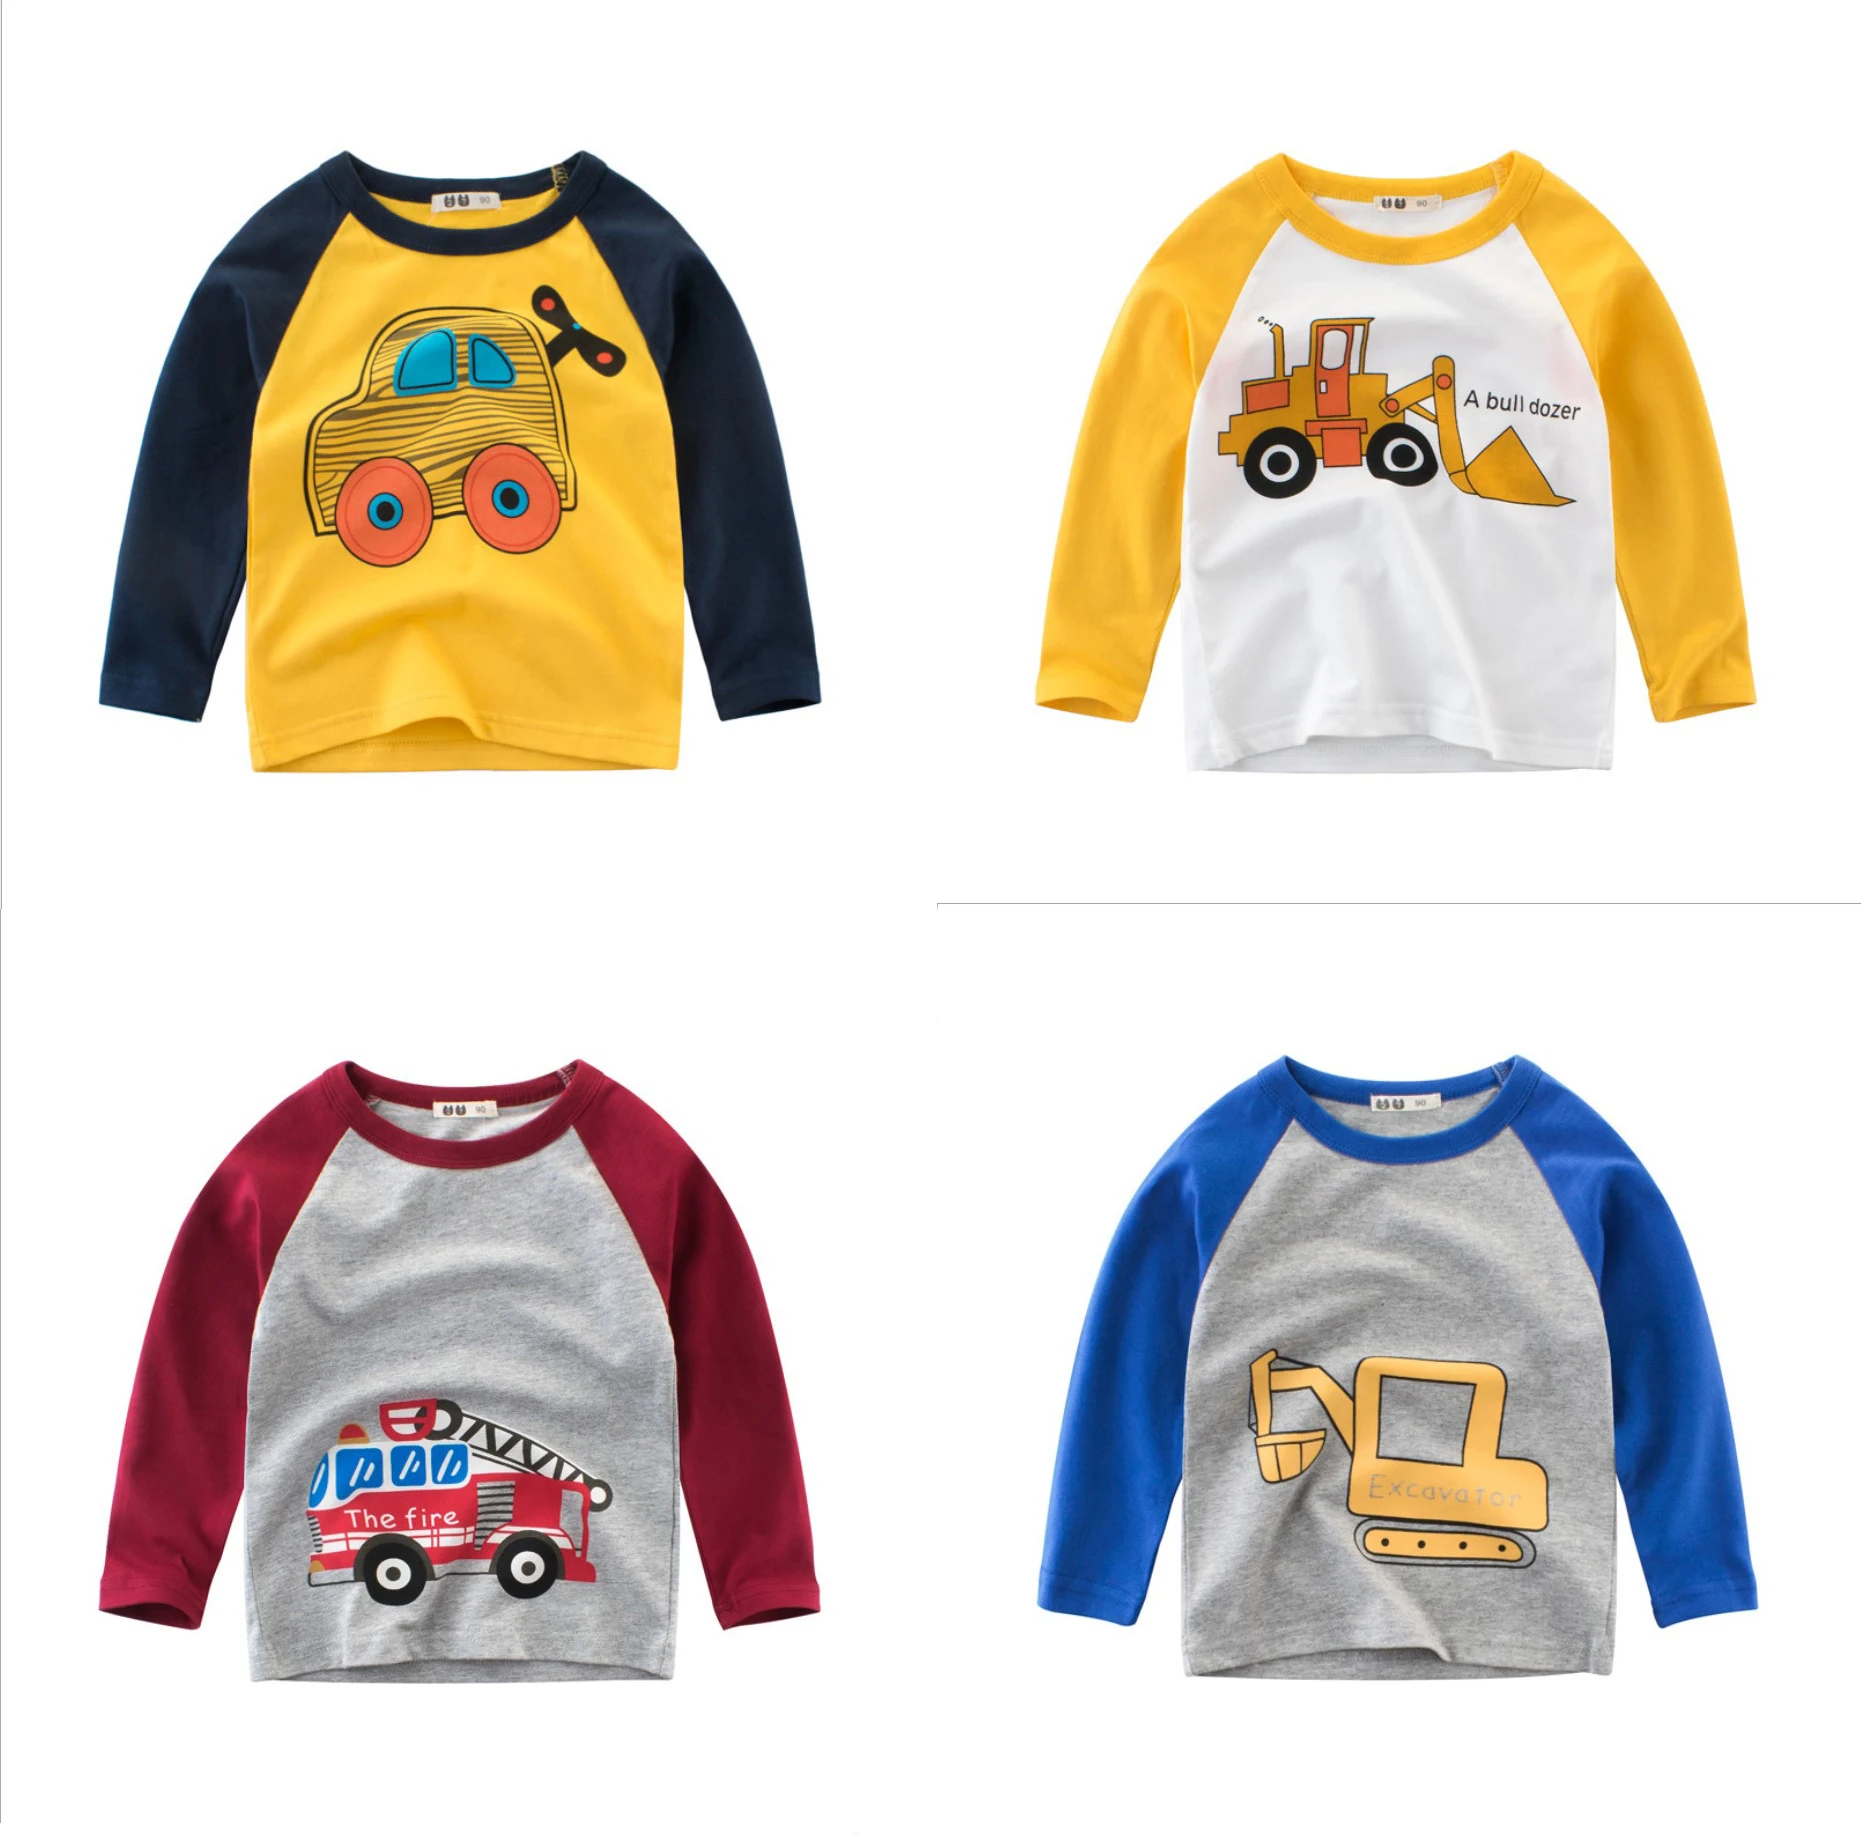 

7plus1 2020 new kids boys car printing long sleeve cotton T shirts for 3T 4T 5T 6T 7T 8T baby sports clothing